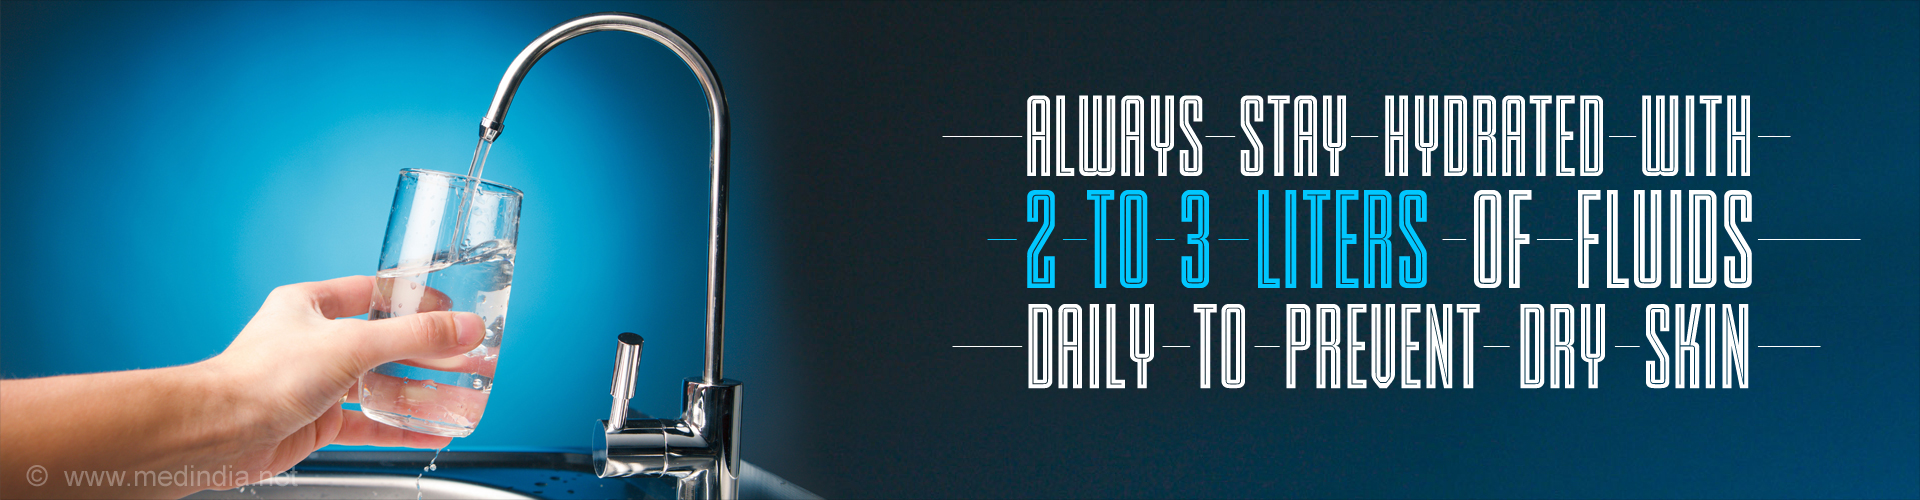 Always Stay Hydrated with 2 to 3 liters of Fluids Daily to Prevent Dry Skin